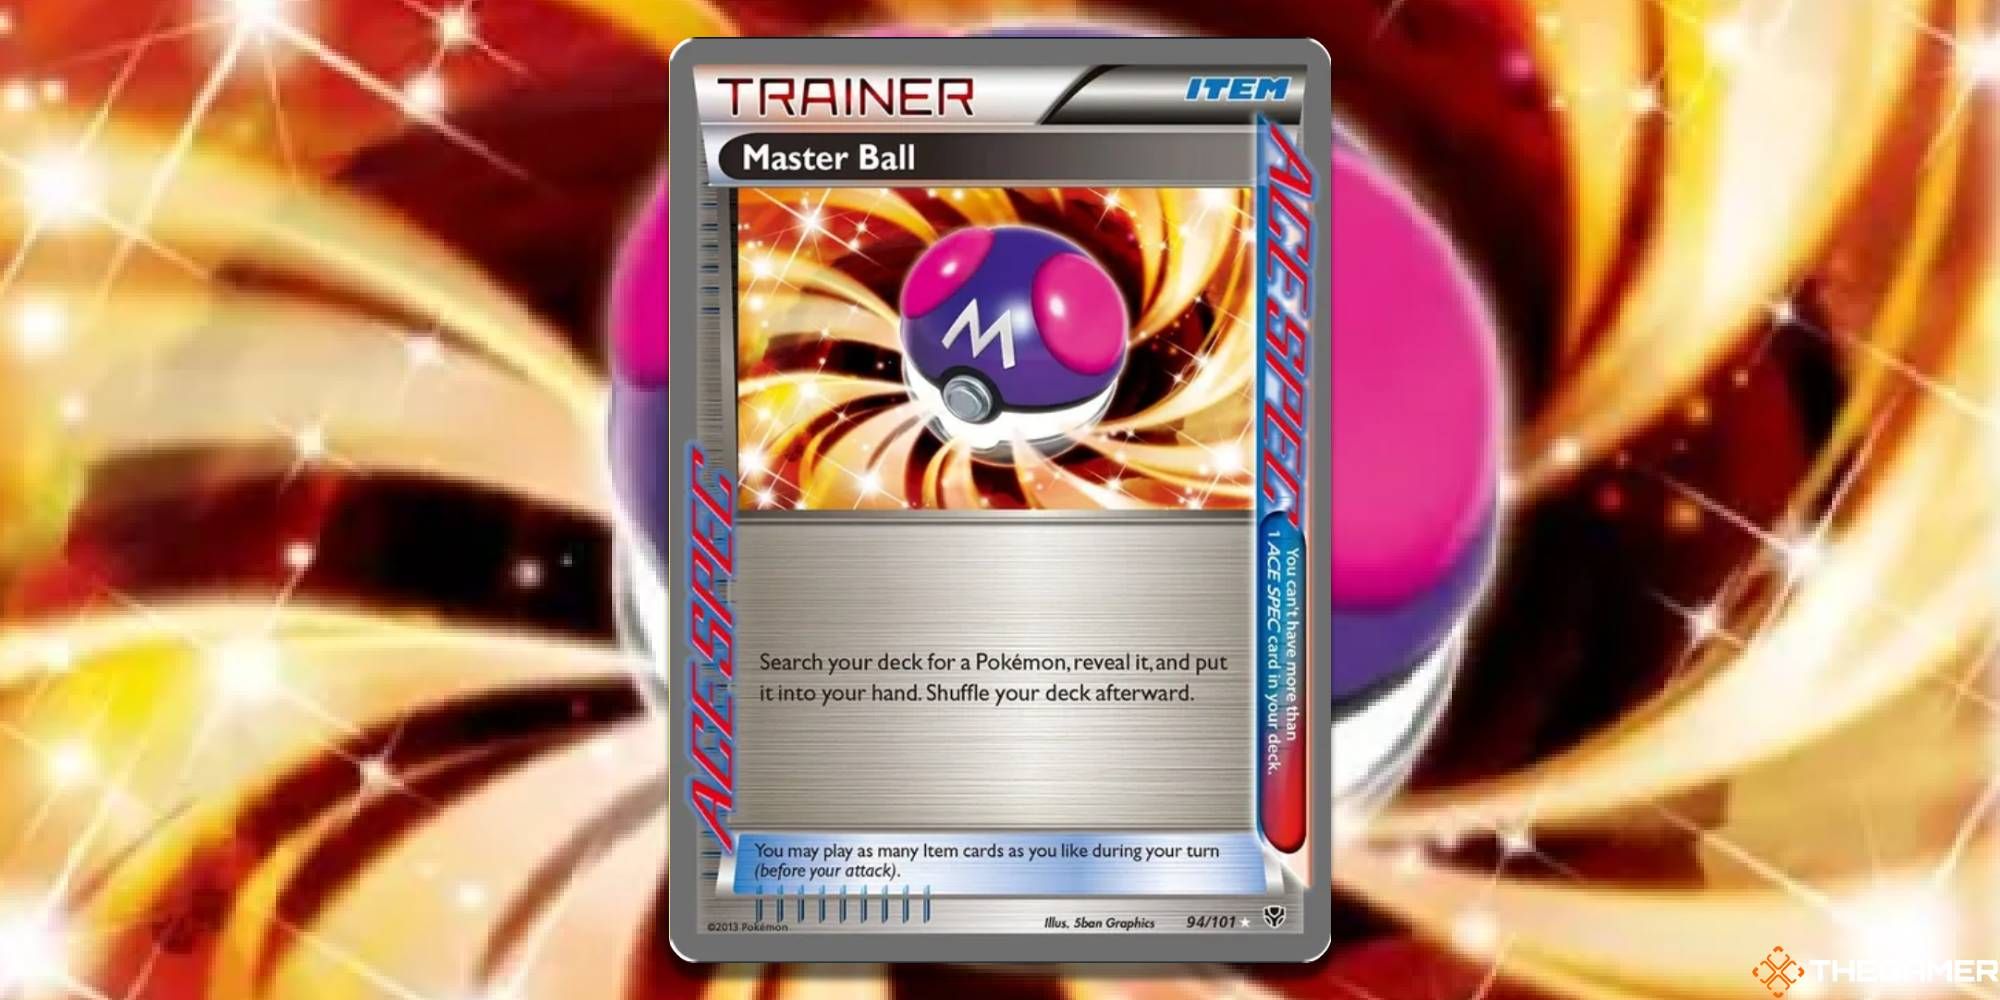 Master Ball from the Pokemon TCG, with blurred background